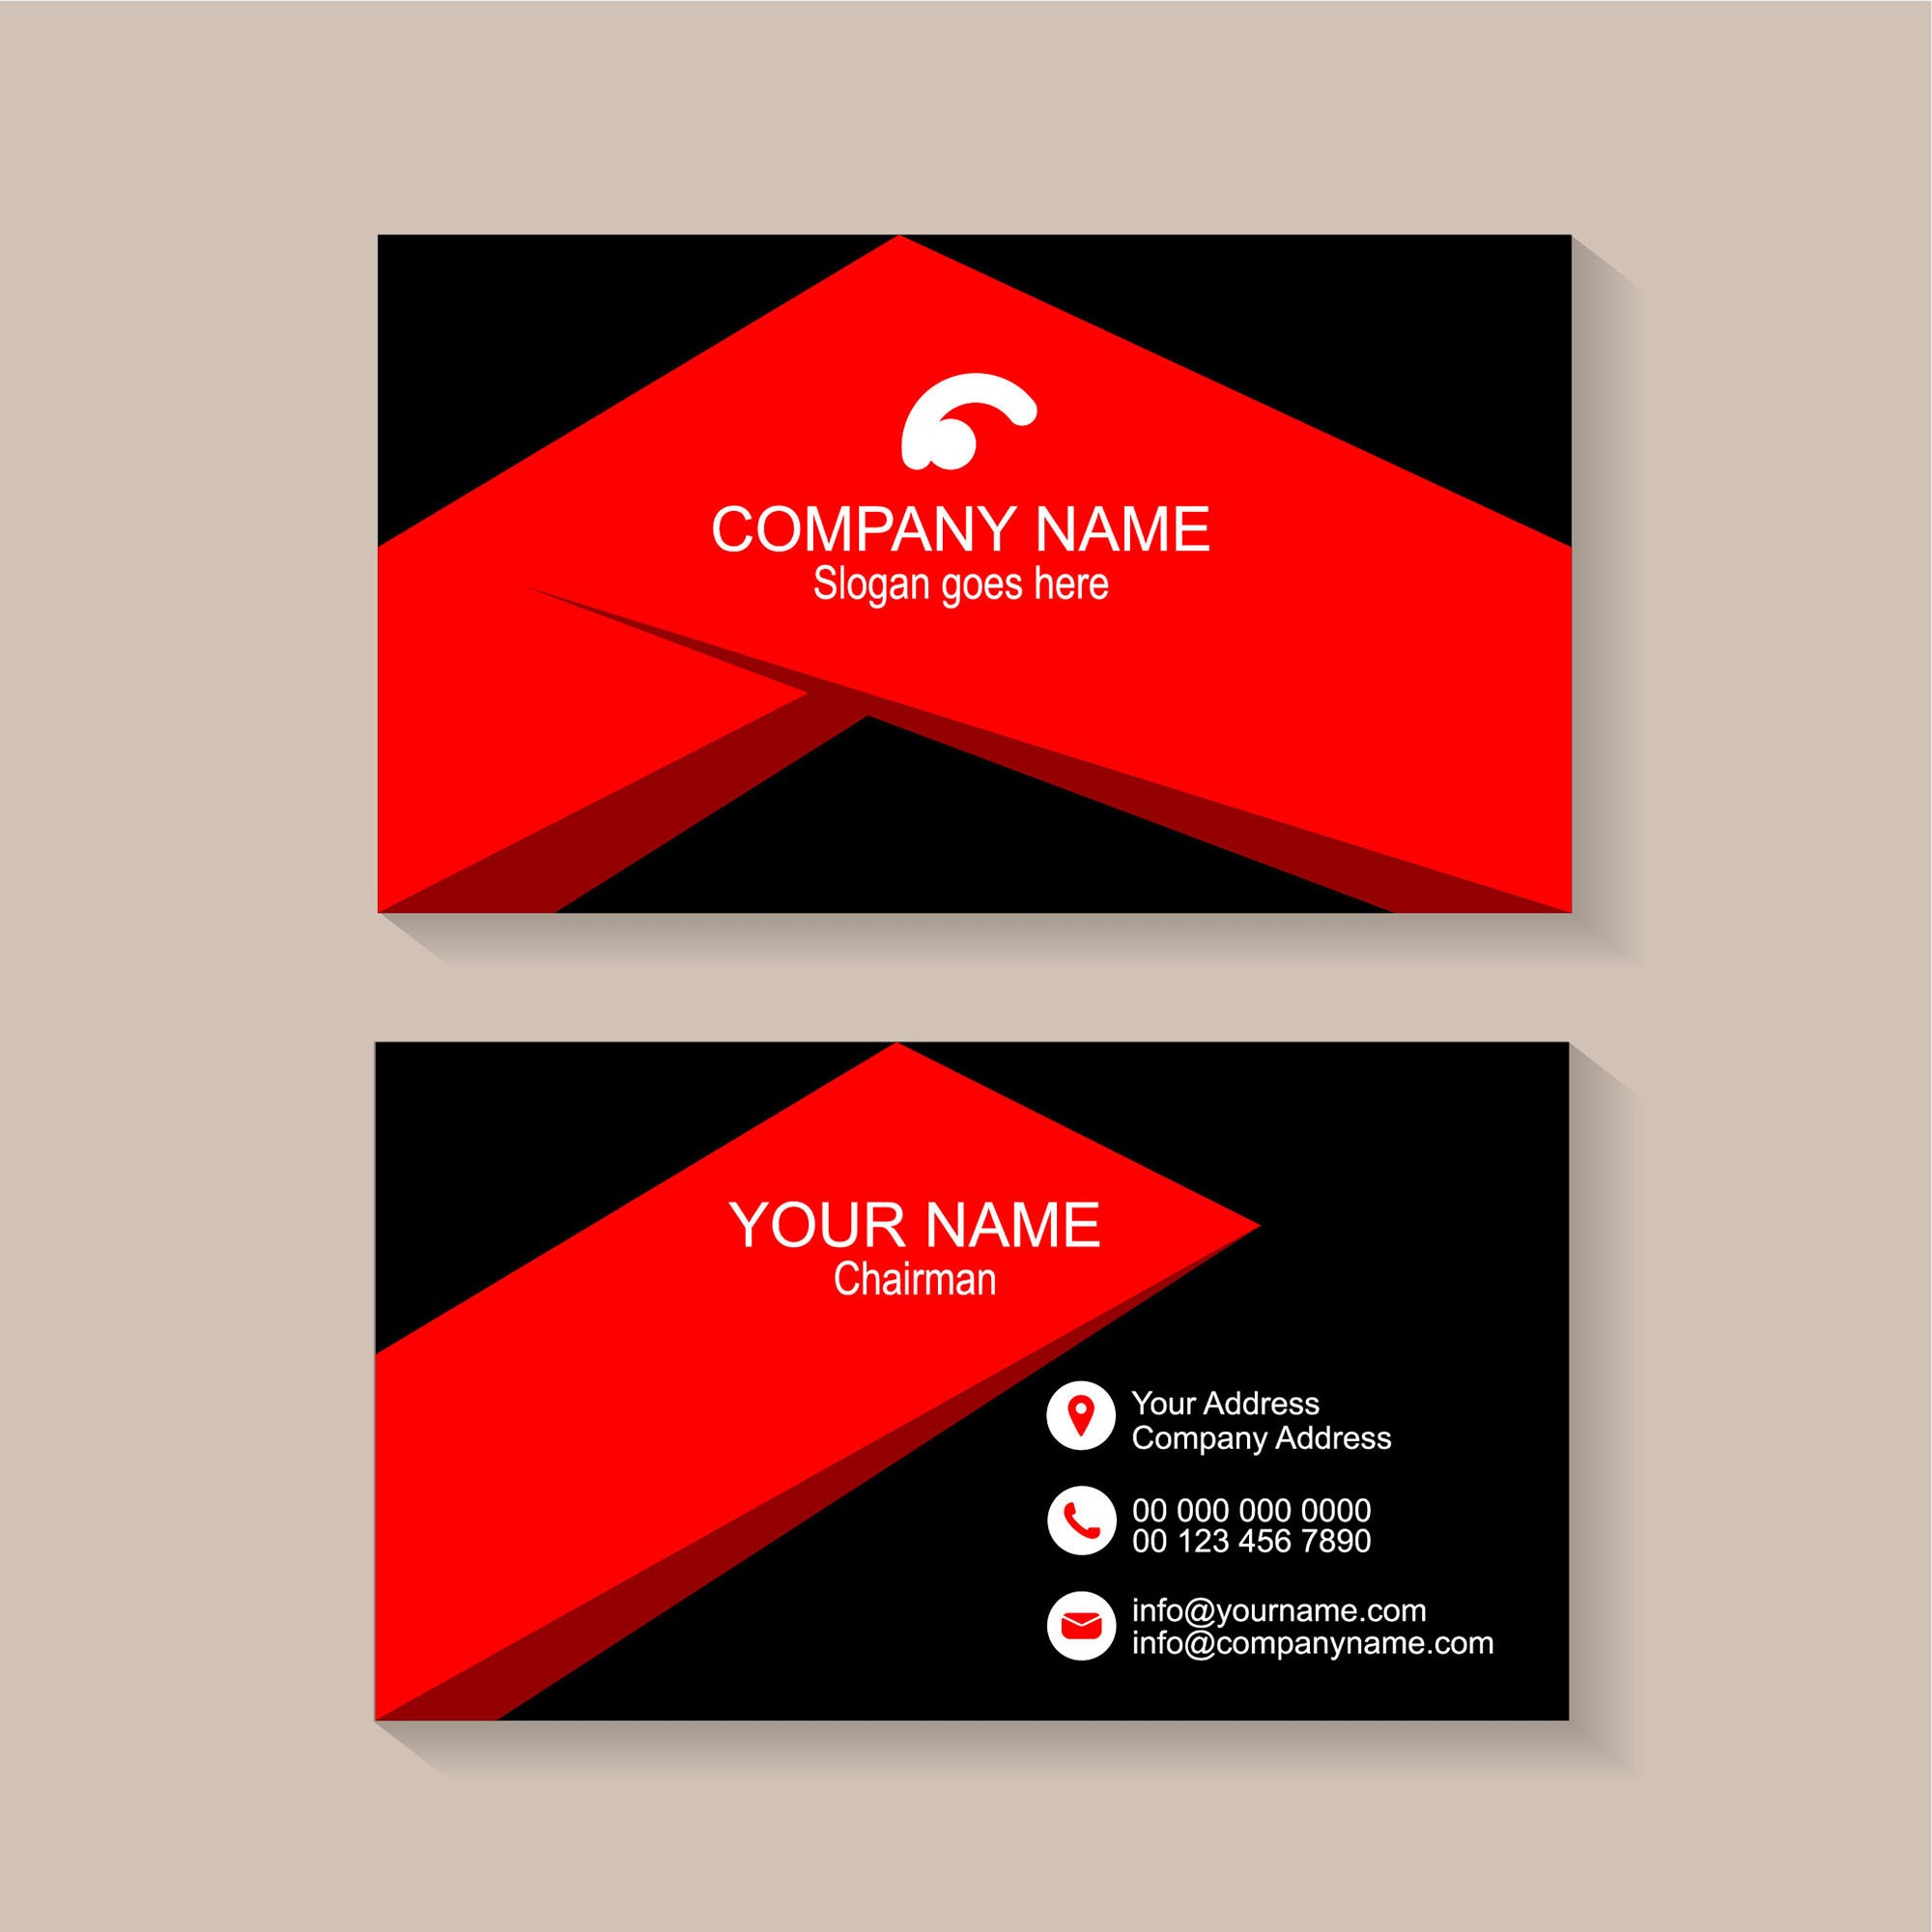 Sample Of Visiting Cards Free Modern Business Card Templates Pertaining To Designer Visiting Cards Templates